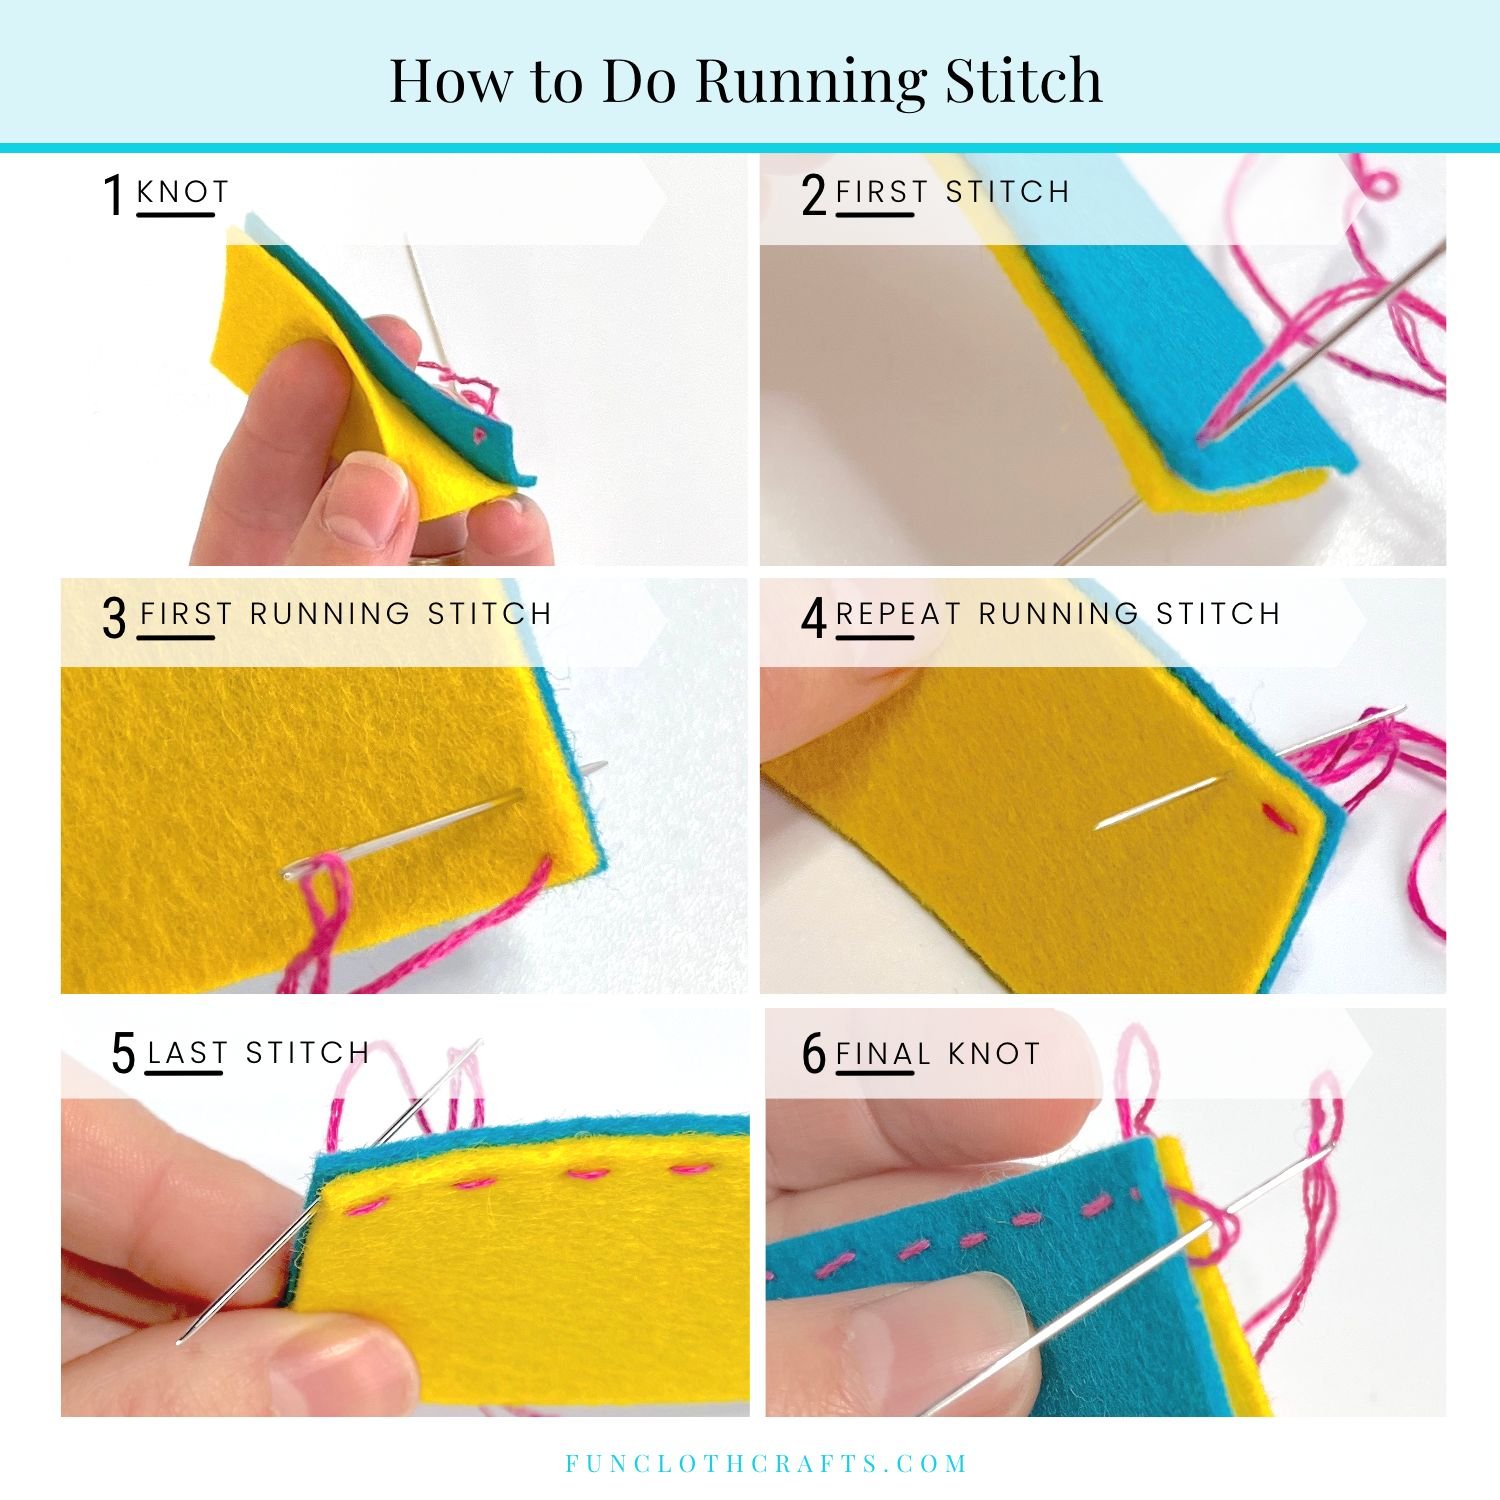 Are you tired of struggling with the running stitch? My step-by-step guide to mastering the running stitch will make sewing a breeze.
Bonus: Looped running stitch

https://www.funclothcrafts.com/all-posts/how-to-running-stitch

#sewingtips #runningst